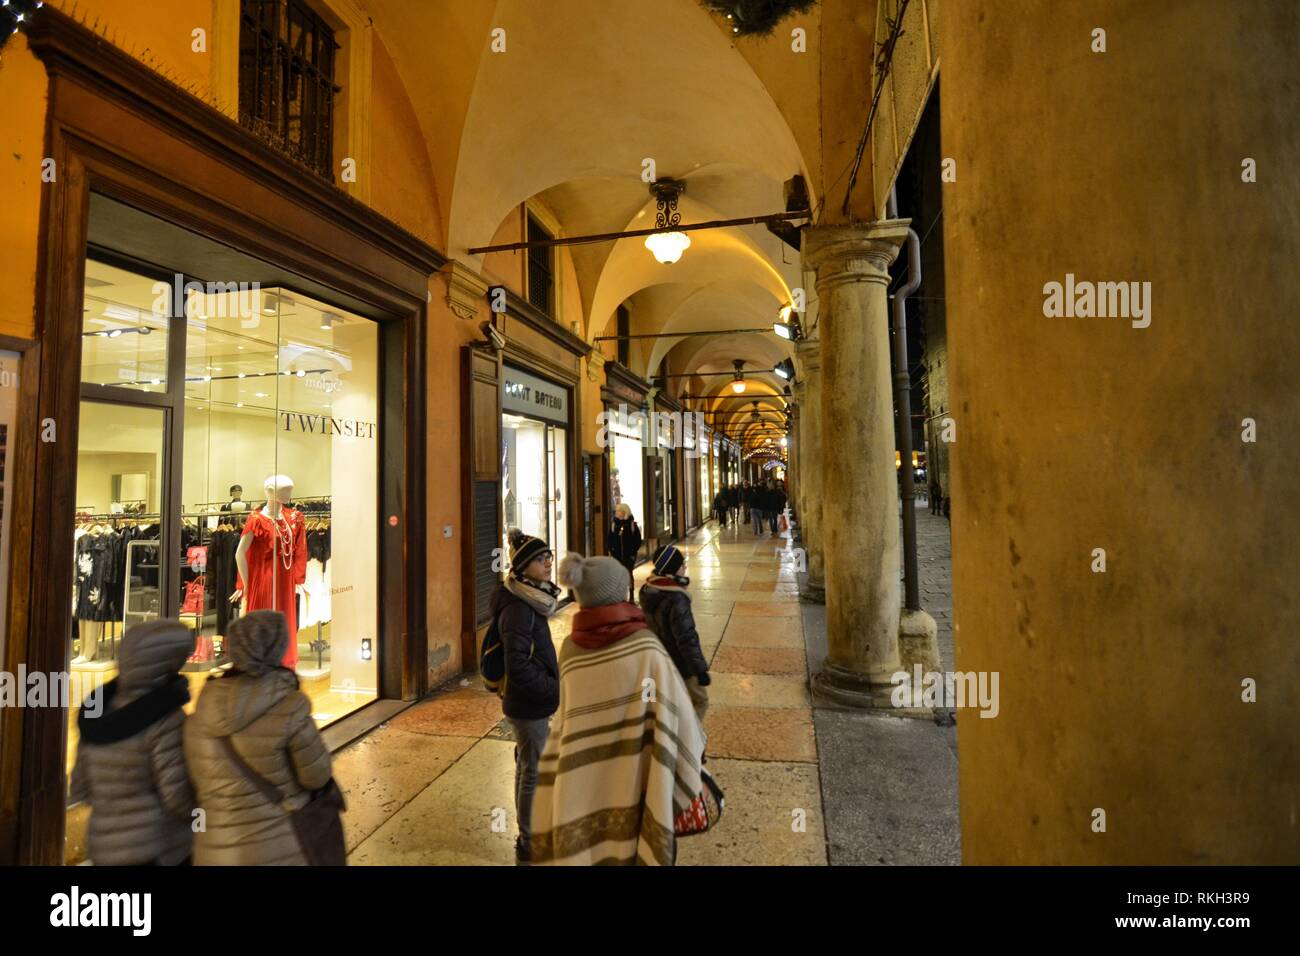 Bologna, Emilia Romagna, Italy. December 2018. The long porticos characterize the city, the Christmas atmosphere attracts people who strolls visiting  Stock Photo